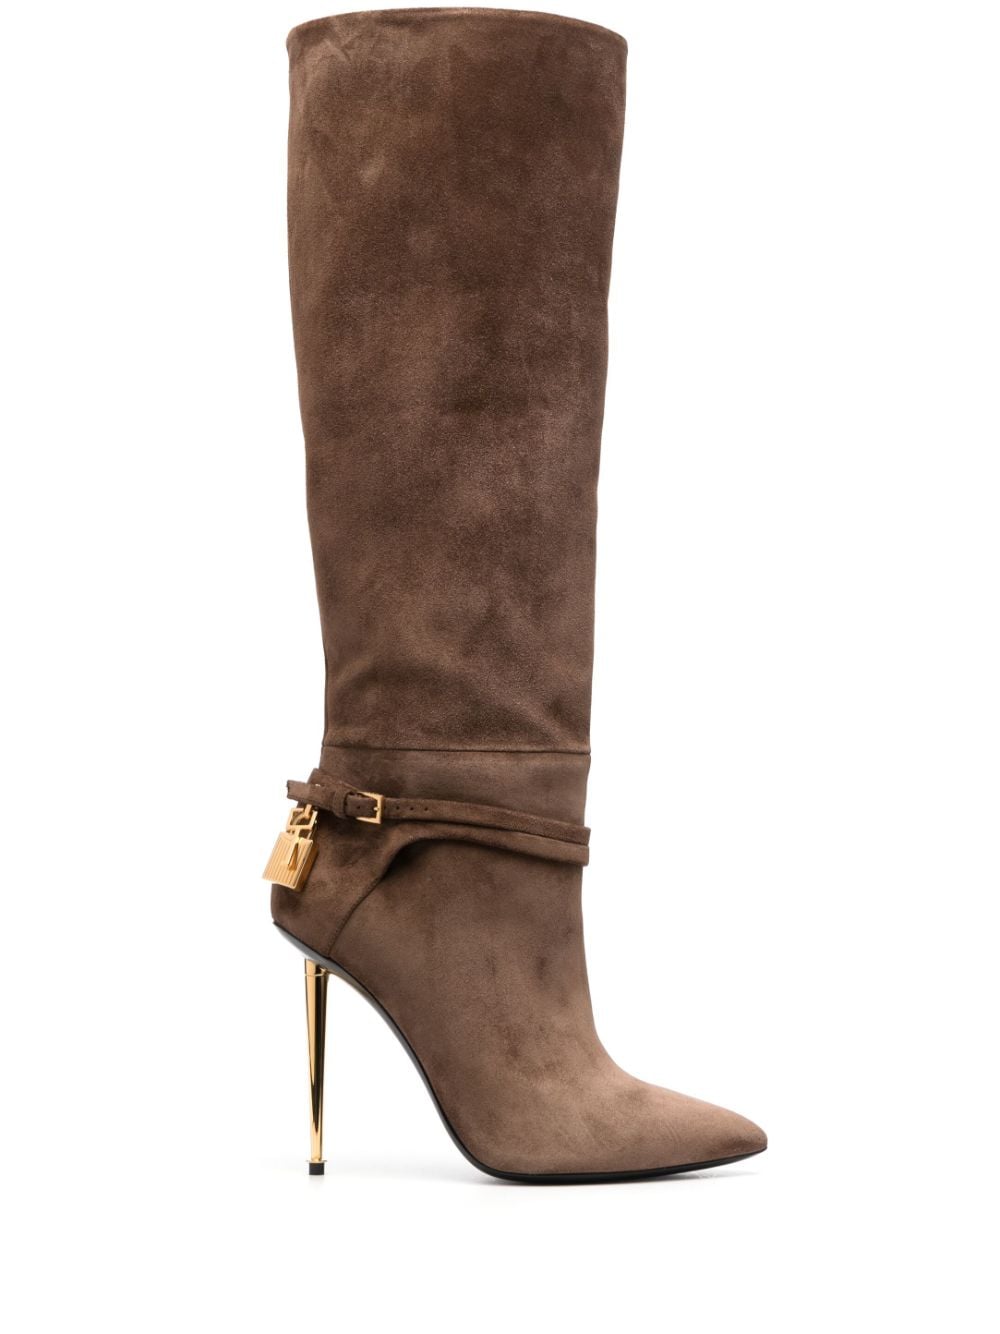 TOM FORD Padlock 120mm suede boots - Brown von TOM FORD